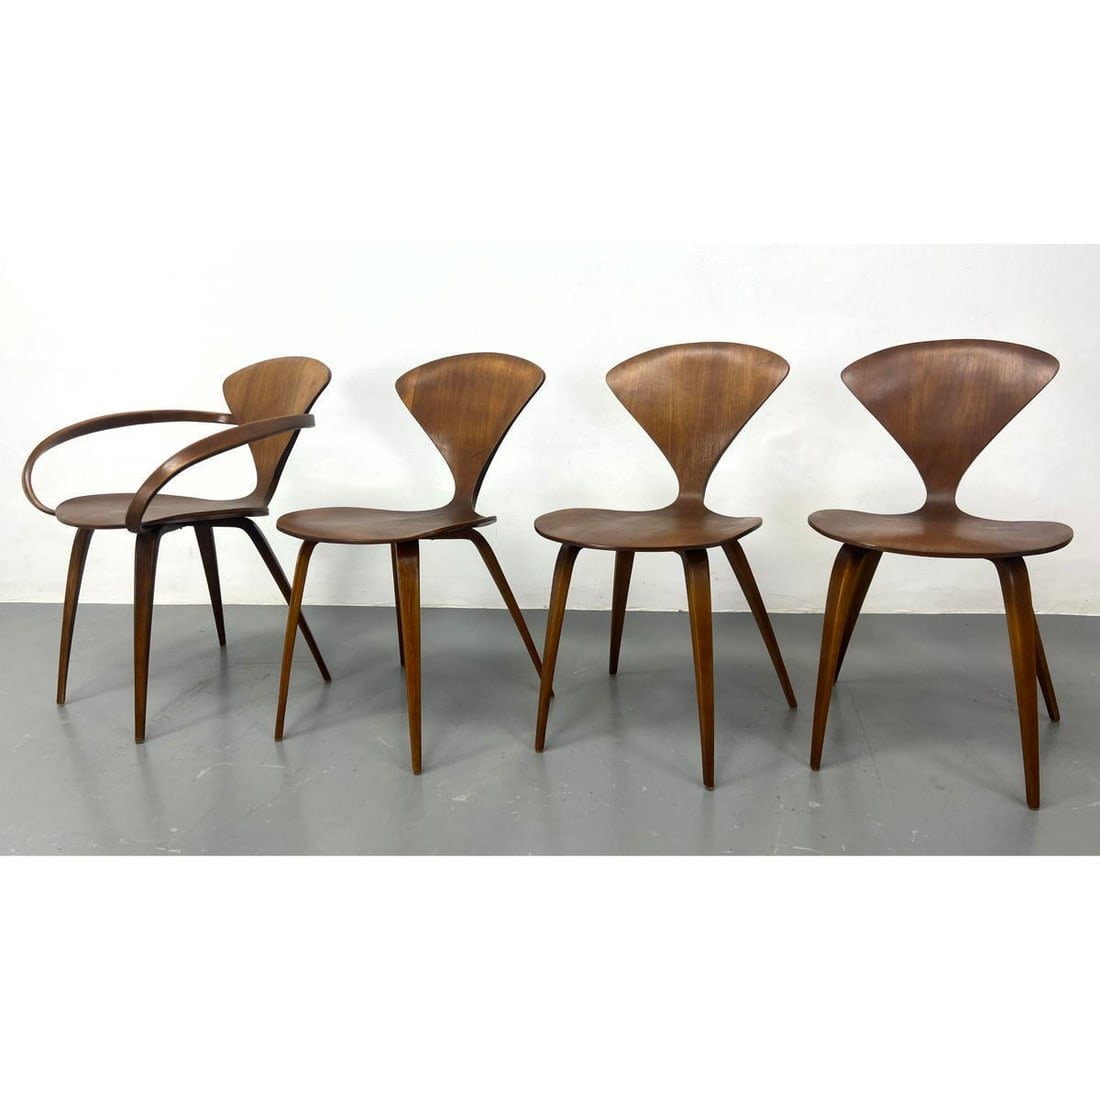 Set of 4 Norman Cherner chairs